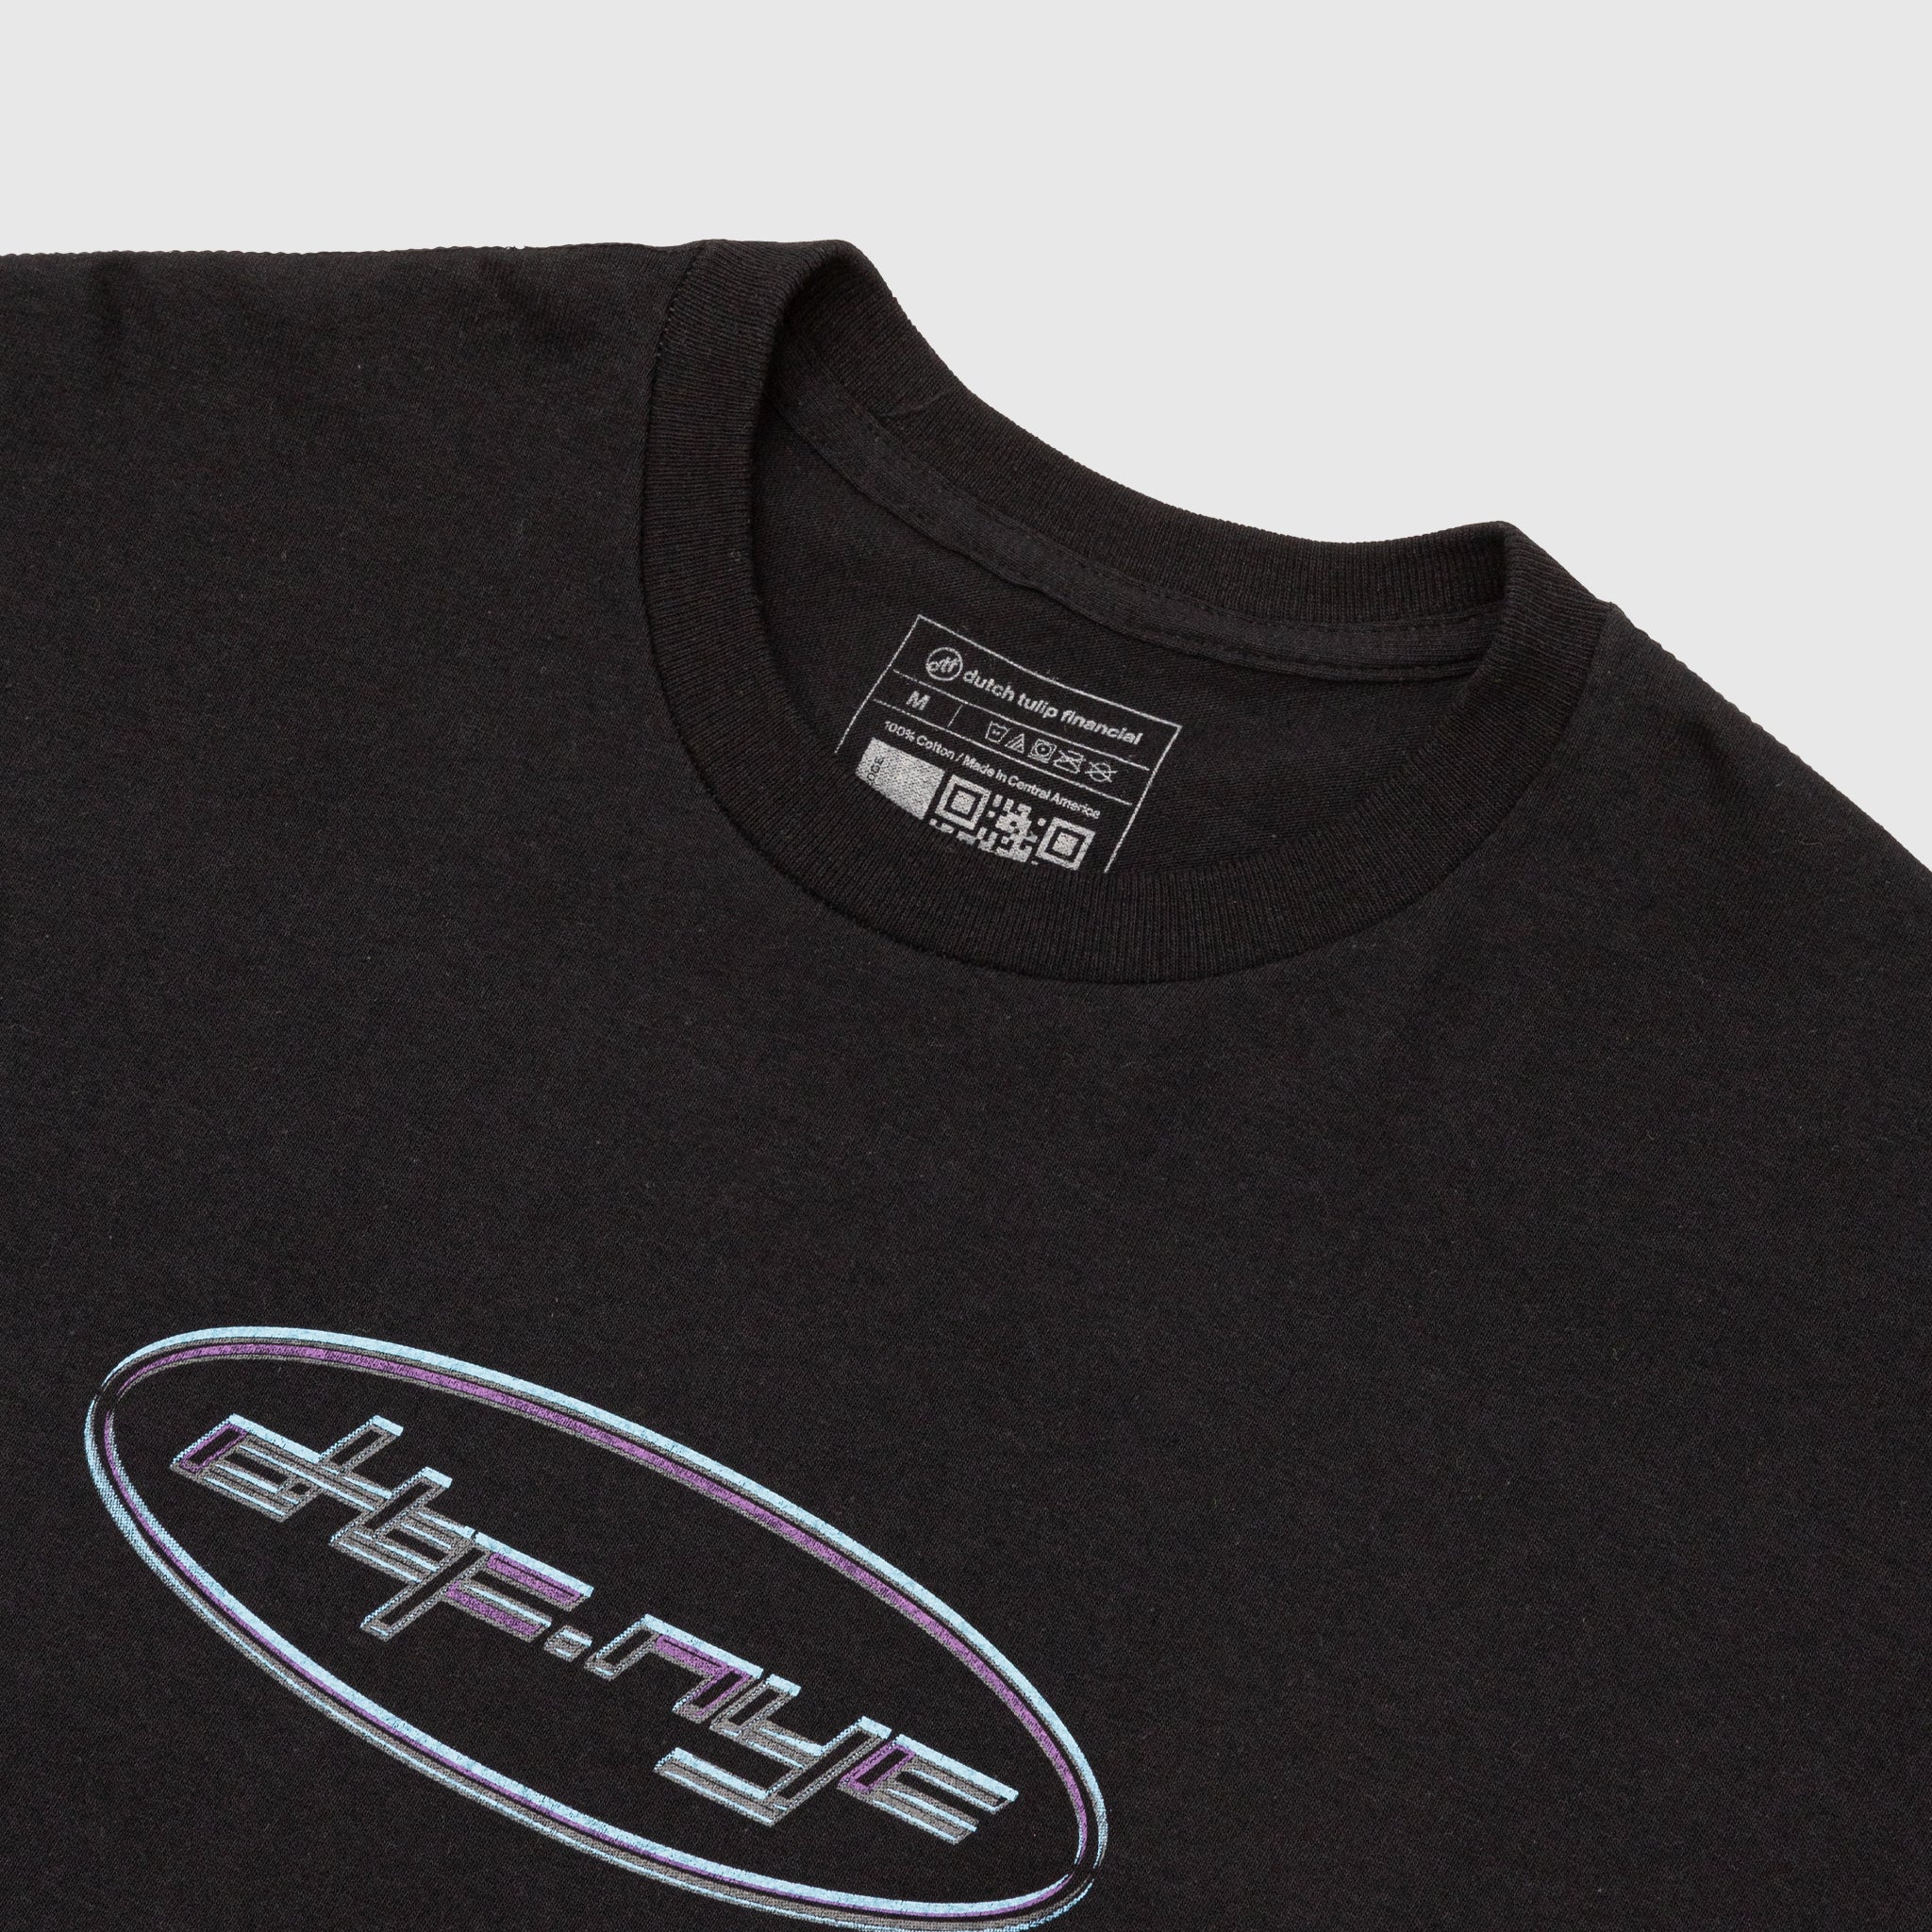 DTF NYC CYBER LOGO S/S T-SHIRT